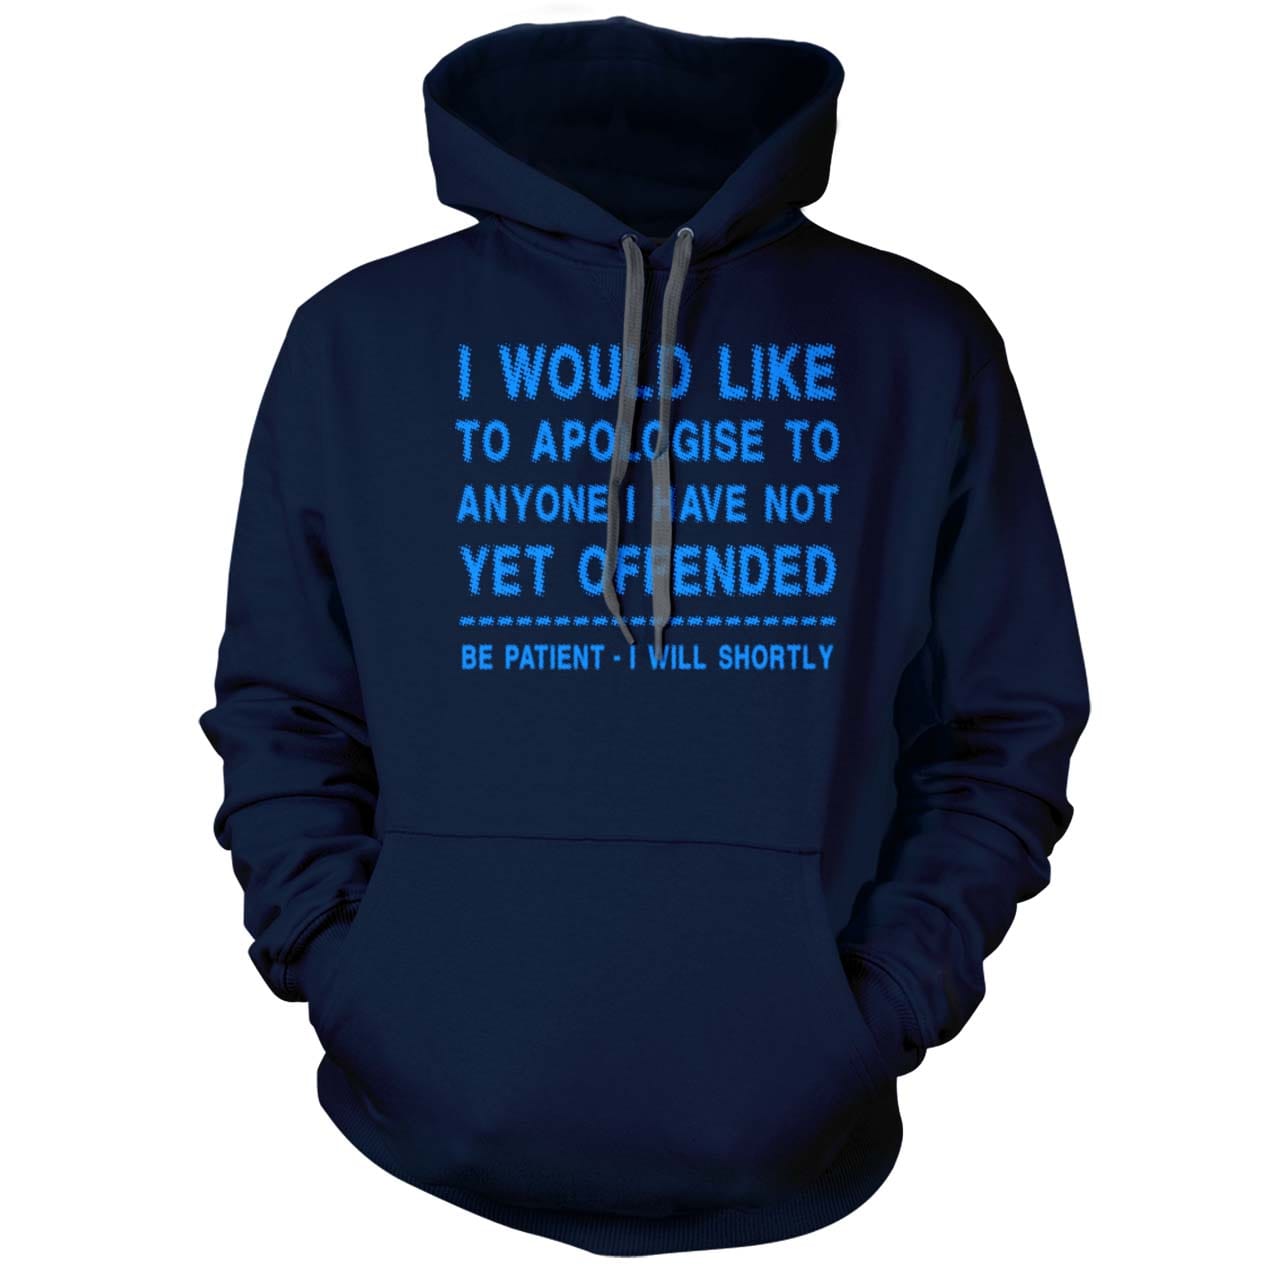 Apologize to Anyone I Have Not Yet Offended Hoodie